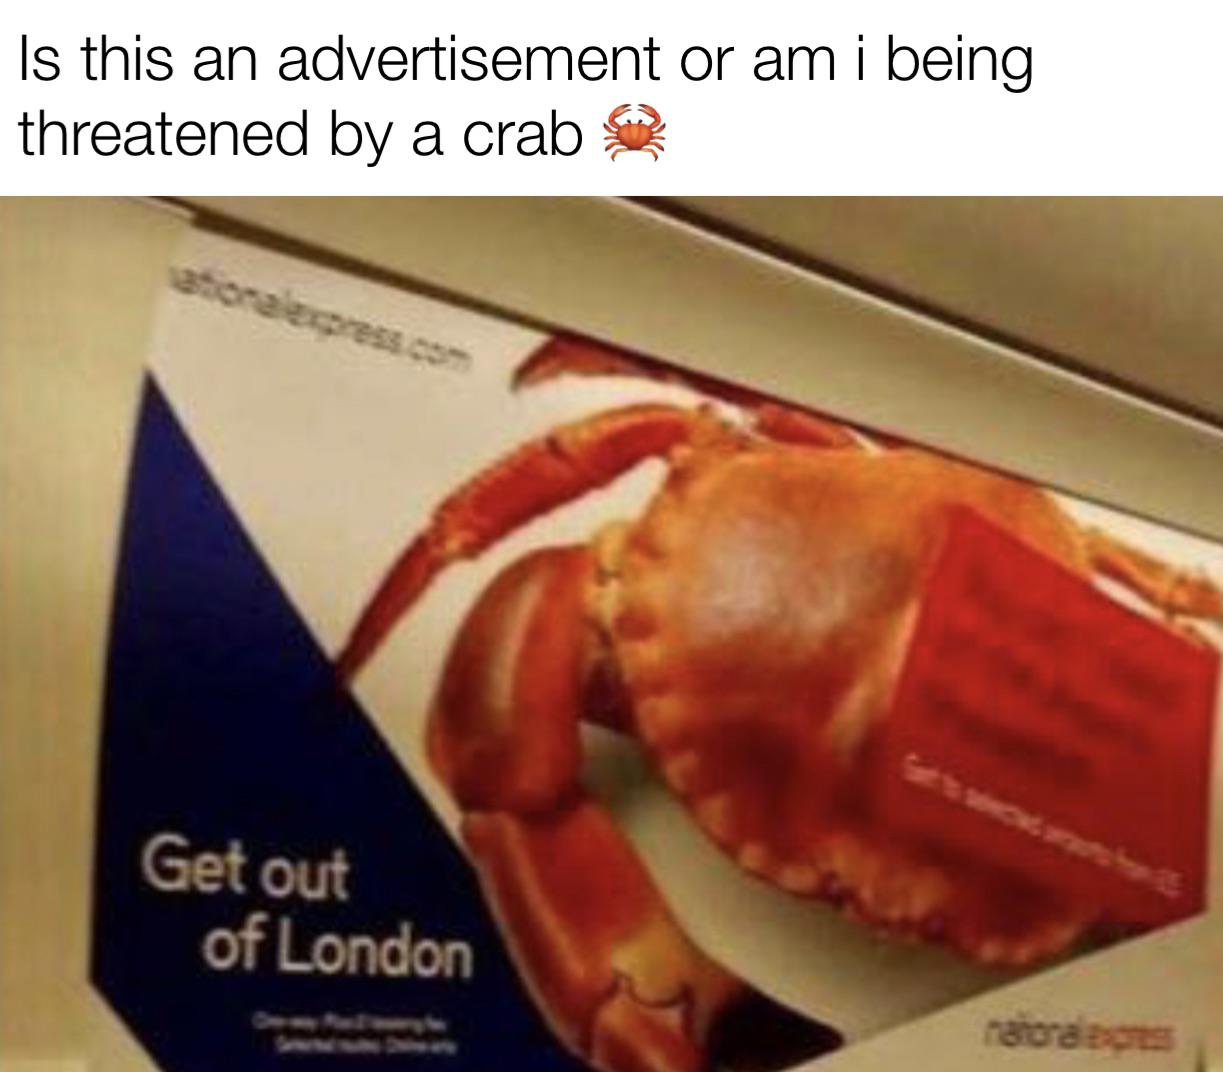 feel like this crab is threatening me - Is this an advertisement or am i being threatened by a crab asonalupress.com Get out of London natora za